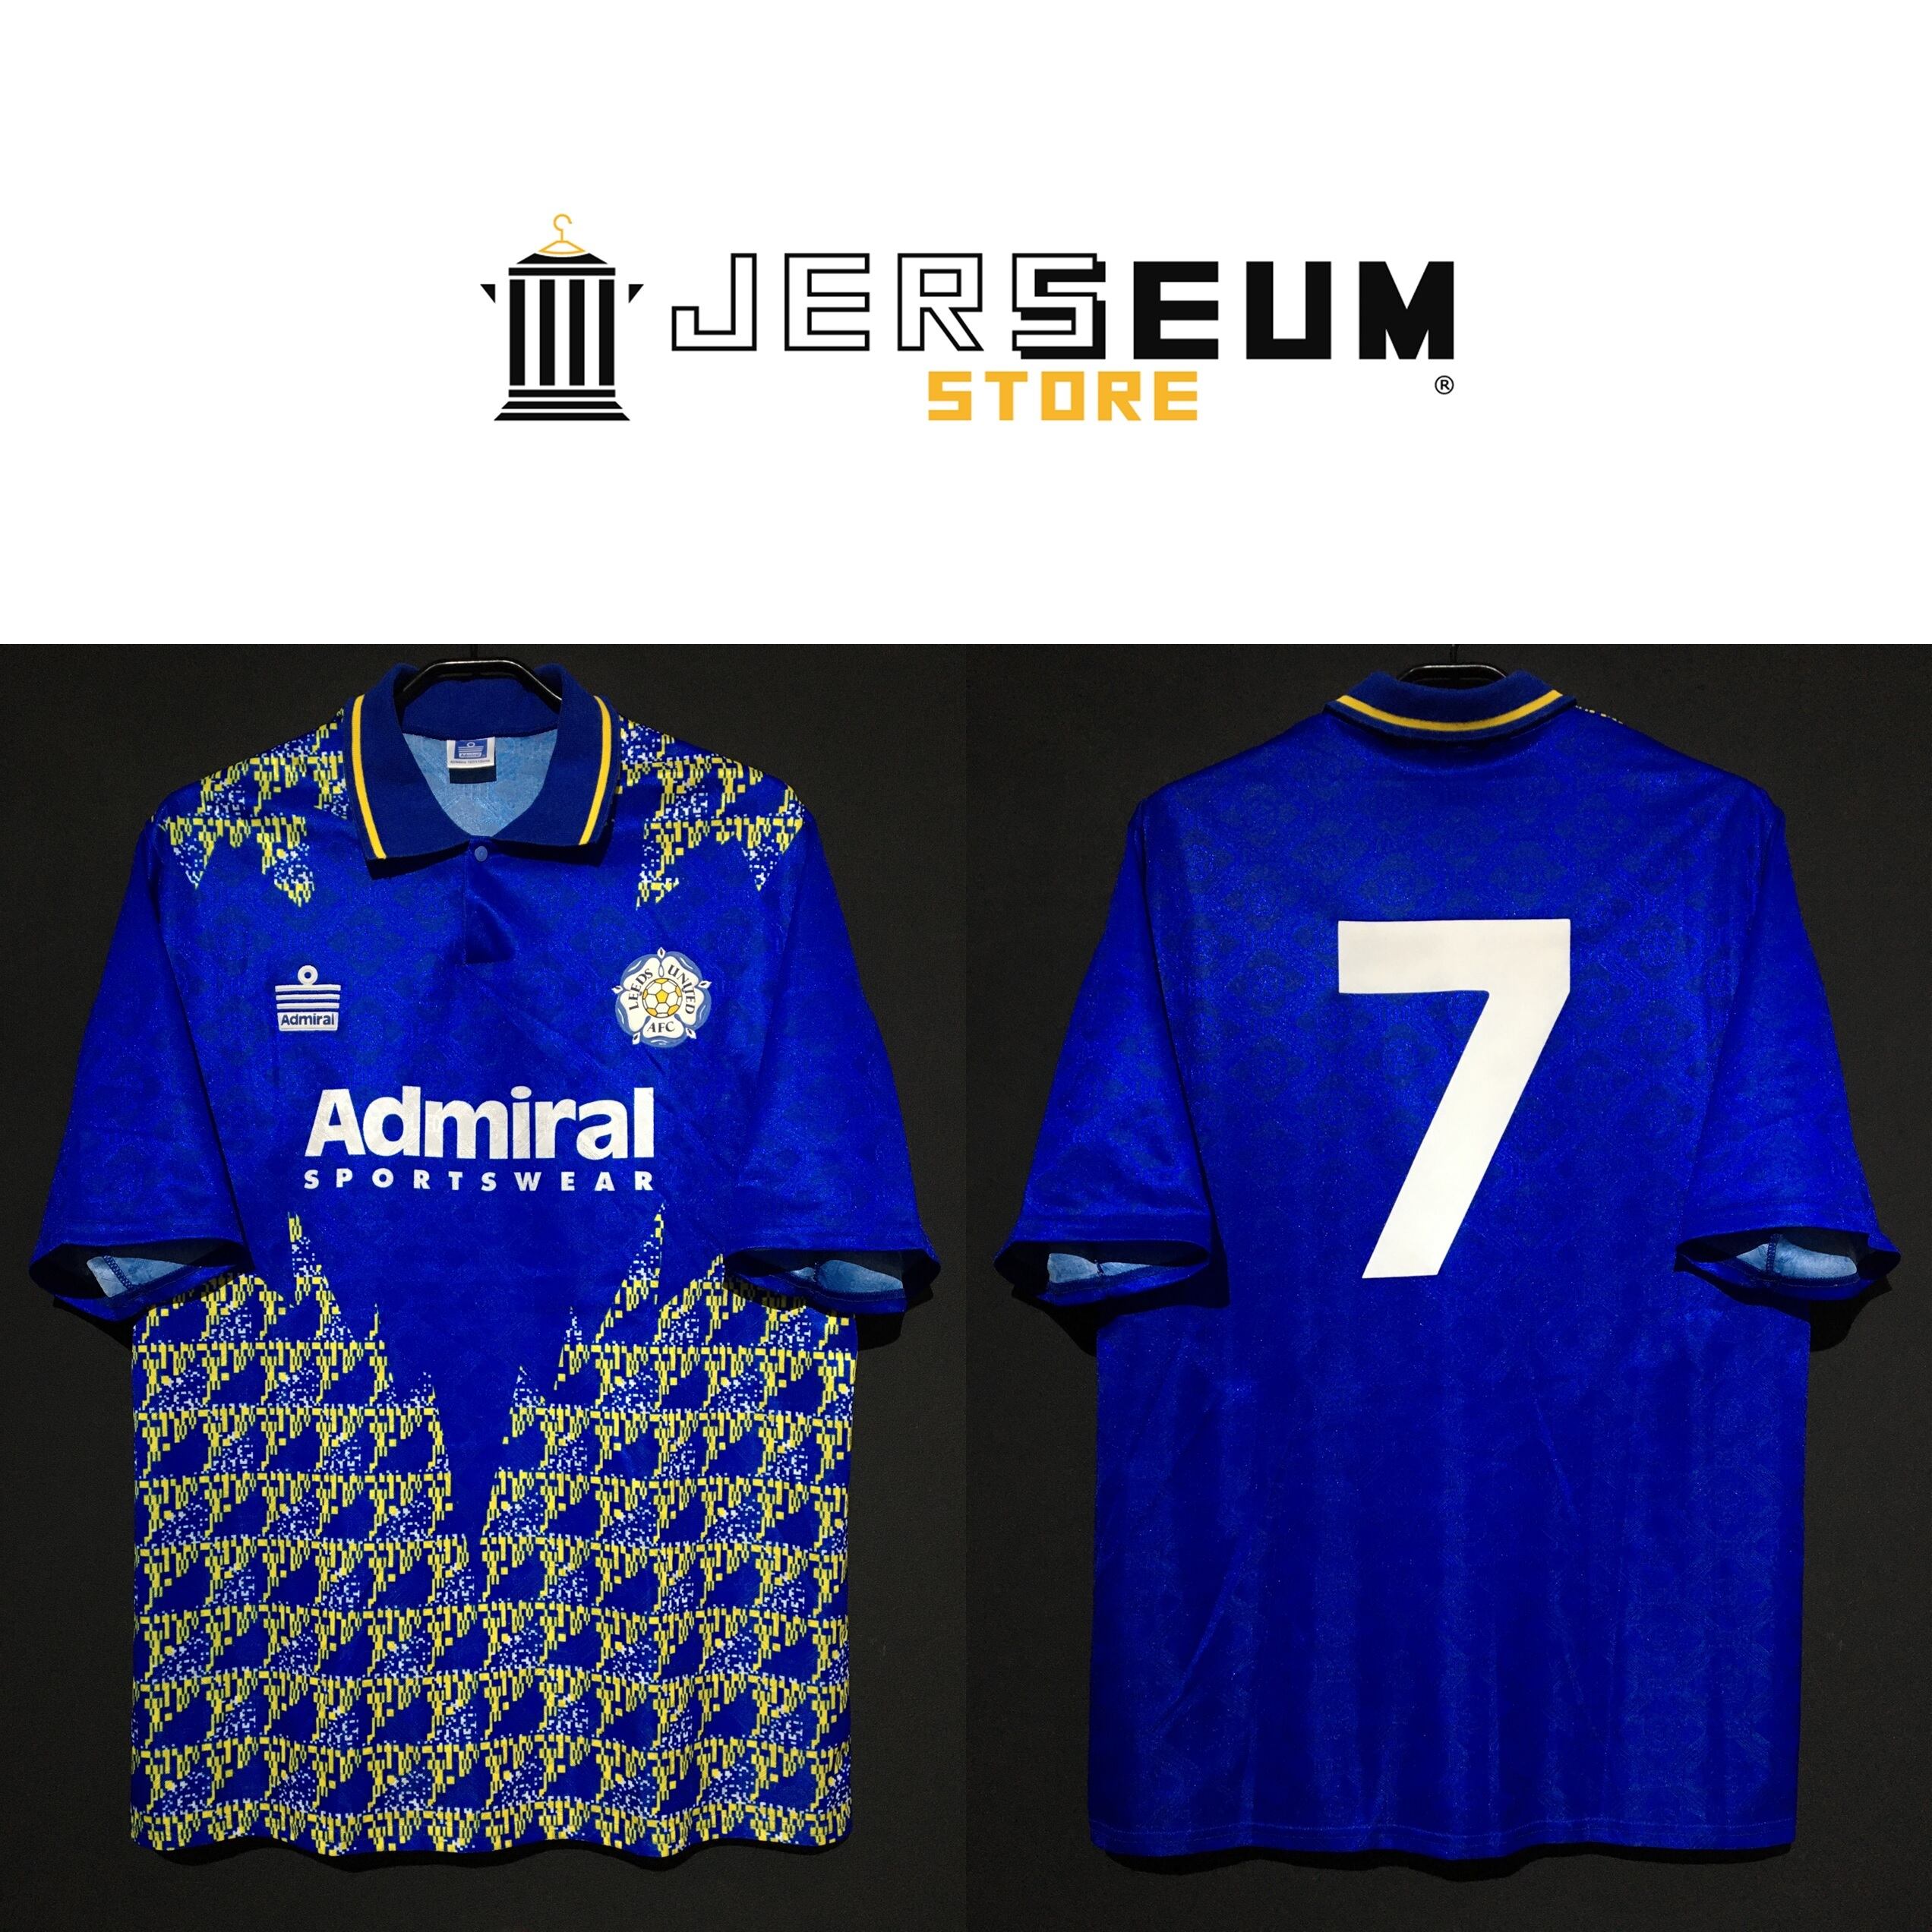 【1992/93】 / Leeds United F.C.（A） / Condition：Preowned / Grade：5 /  Size：42/44（equiv. to L） / No.7